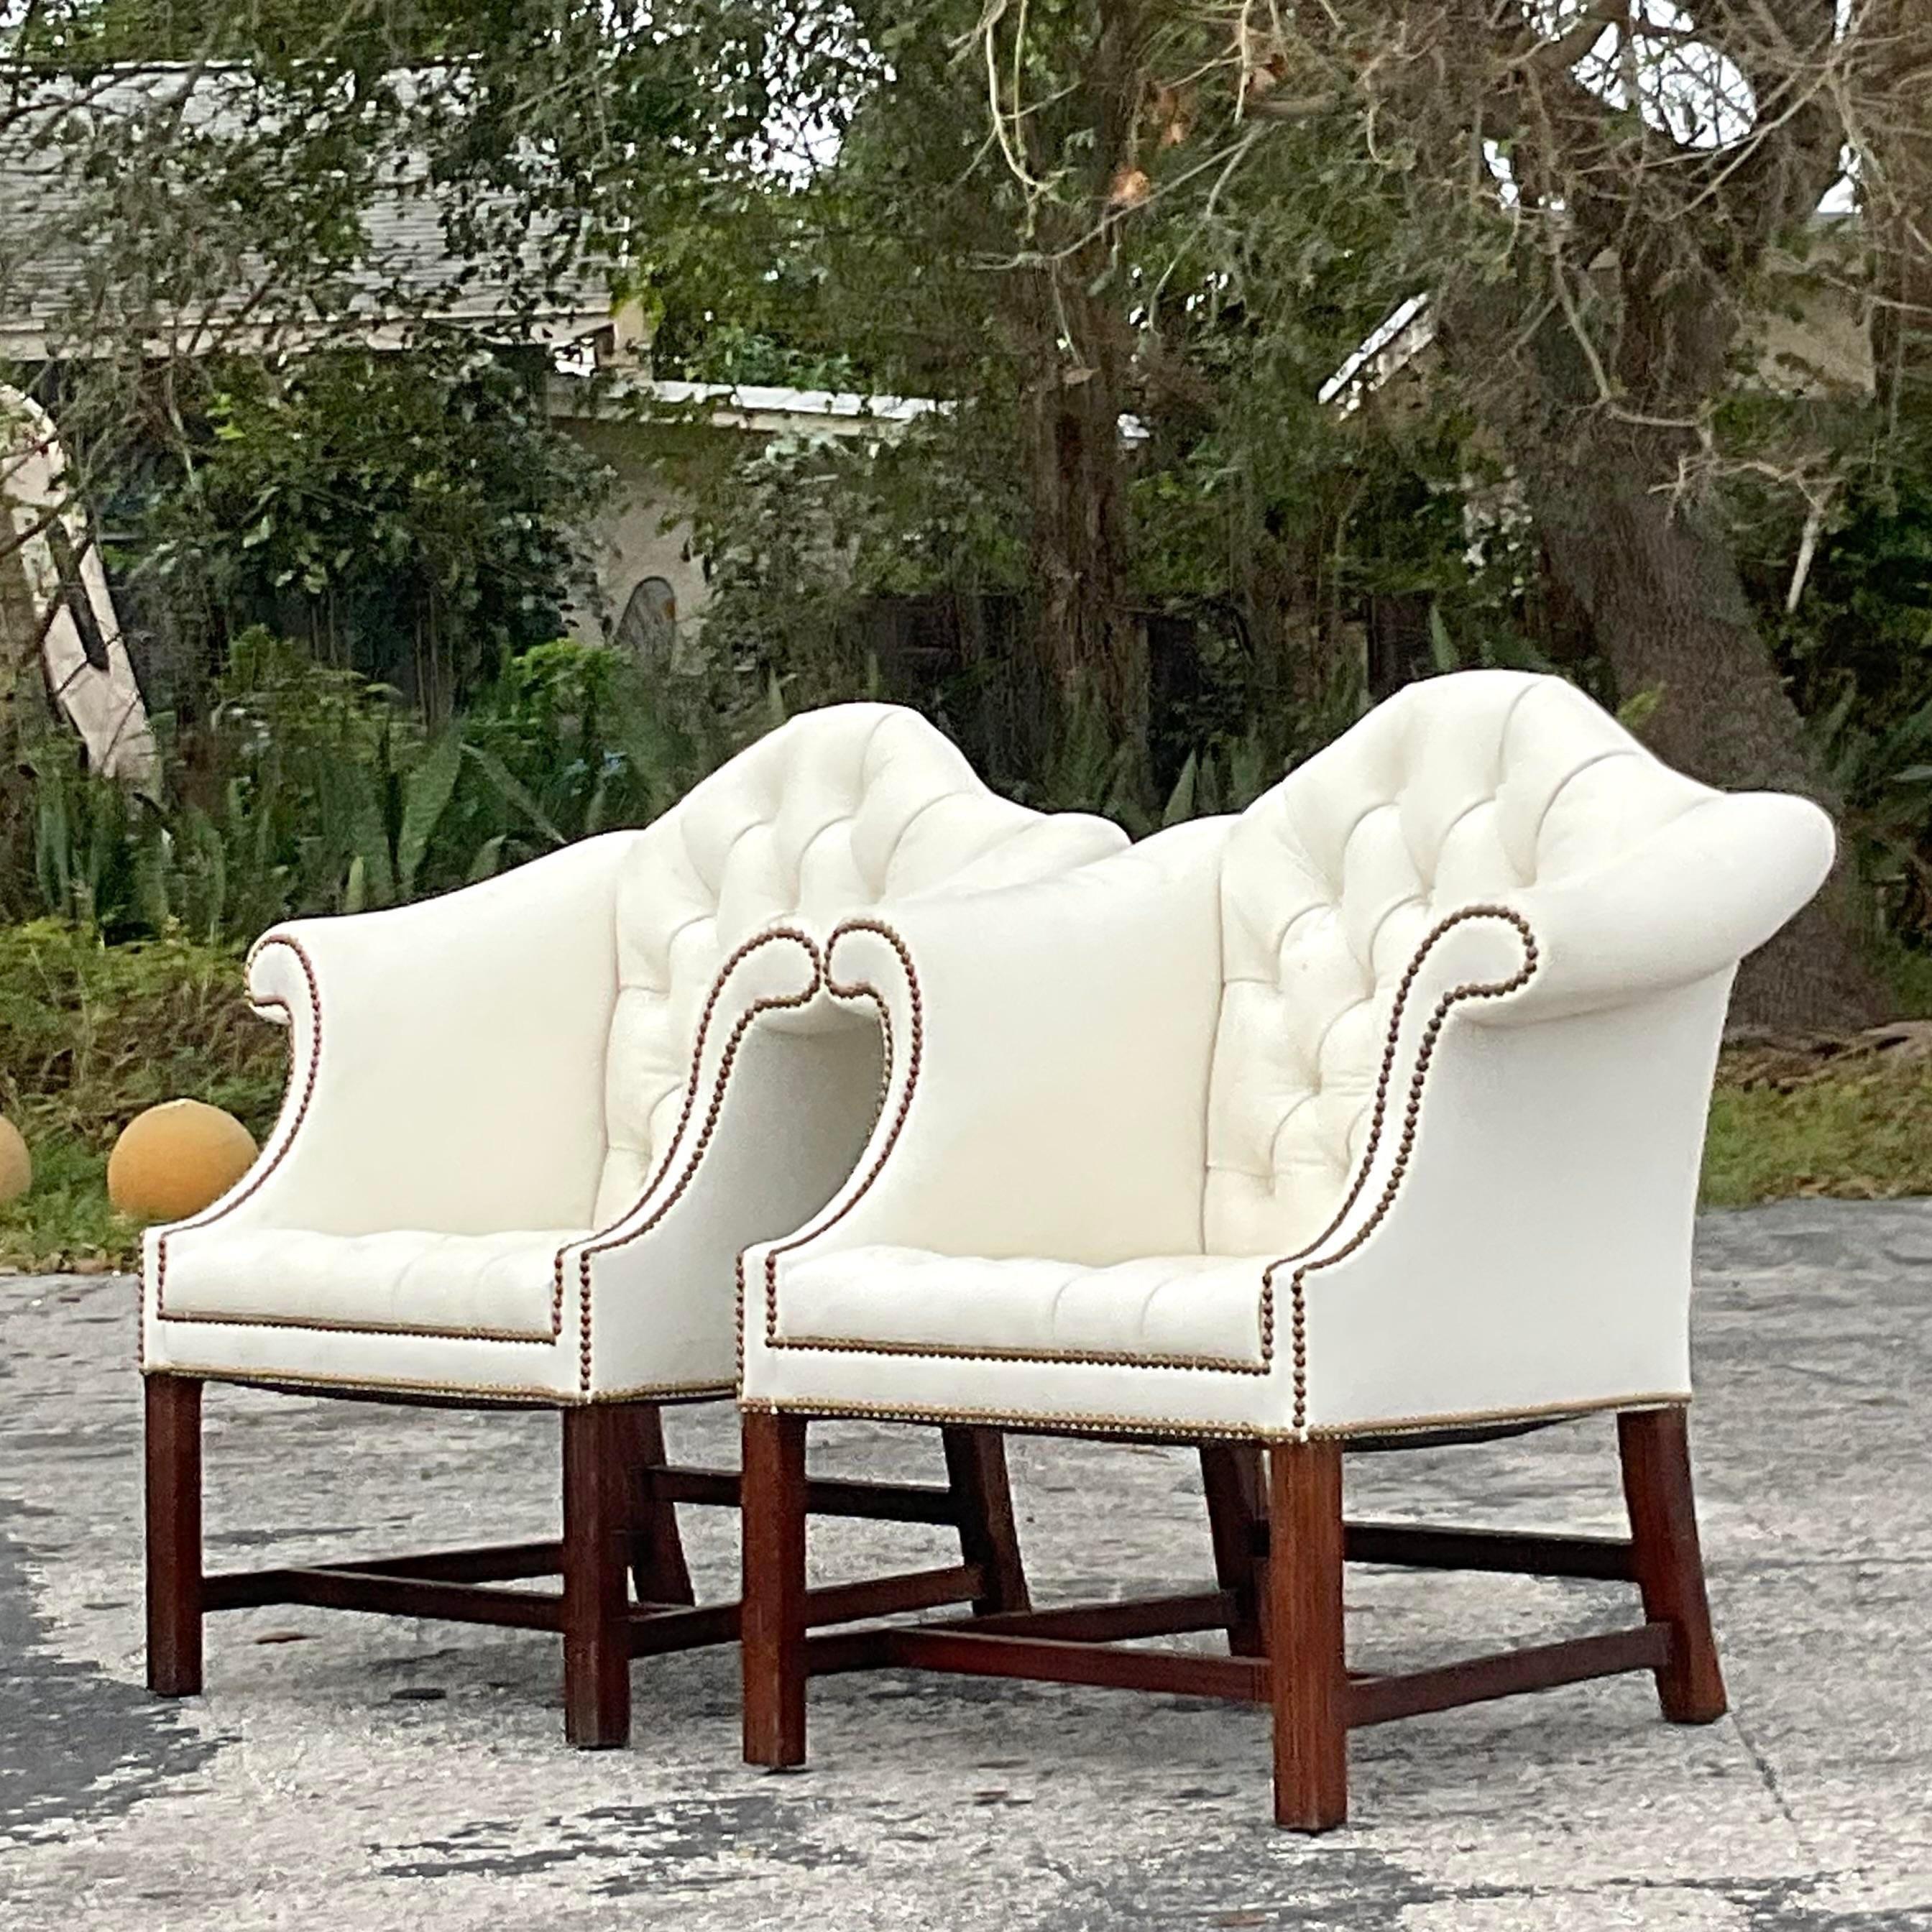 20th Century Vintage Traditional Camel Back Tufted Leather Arm Chairs - a Pair For Sale